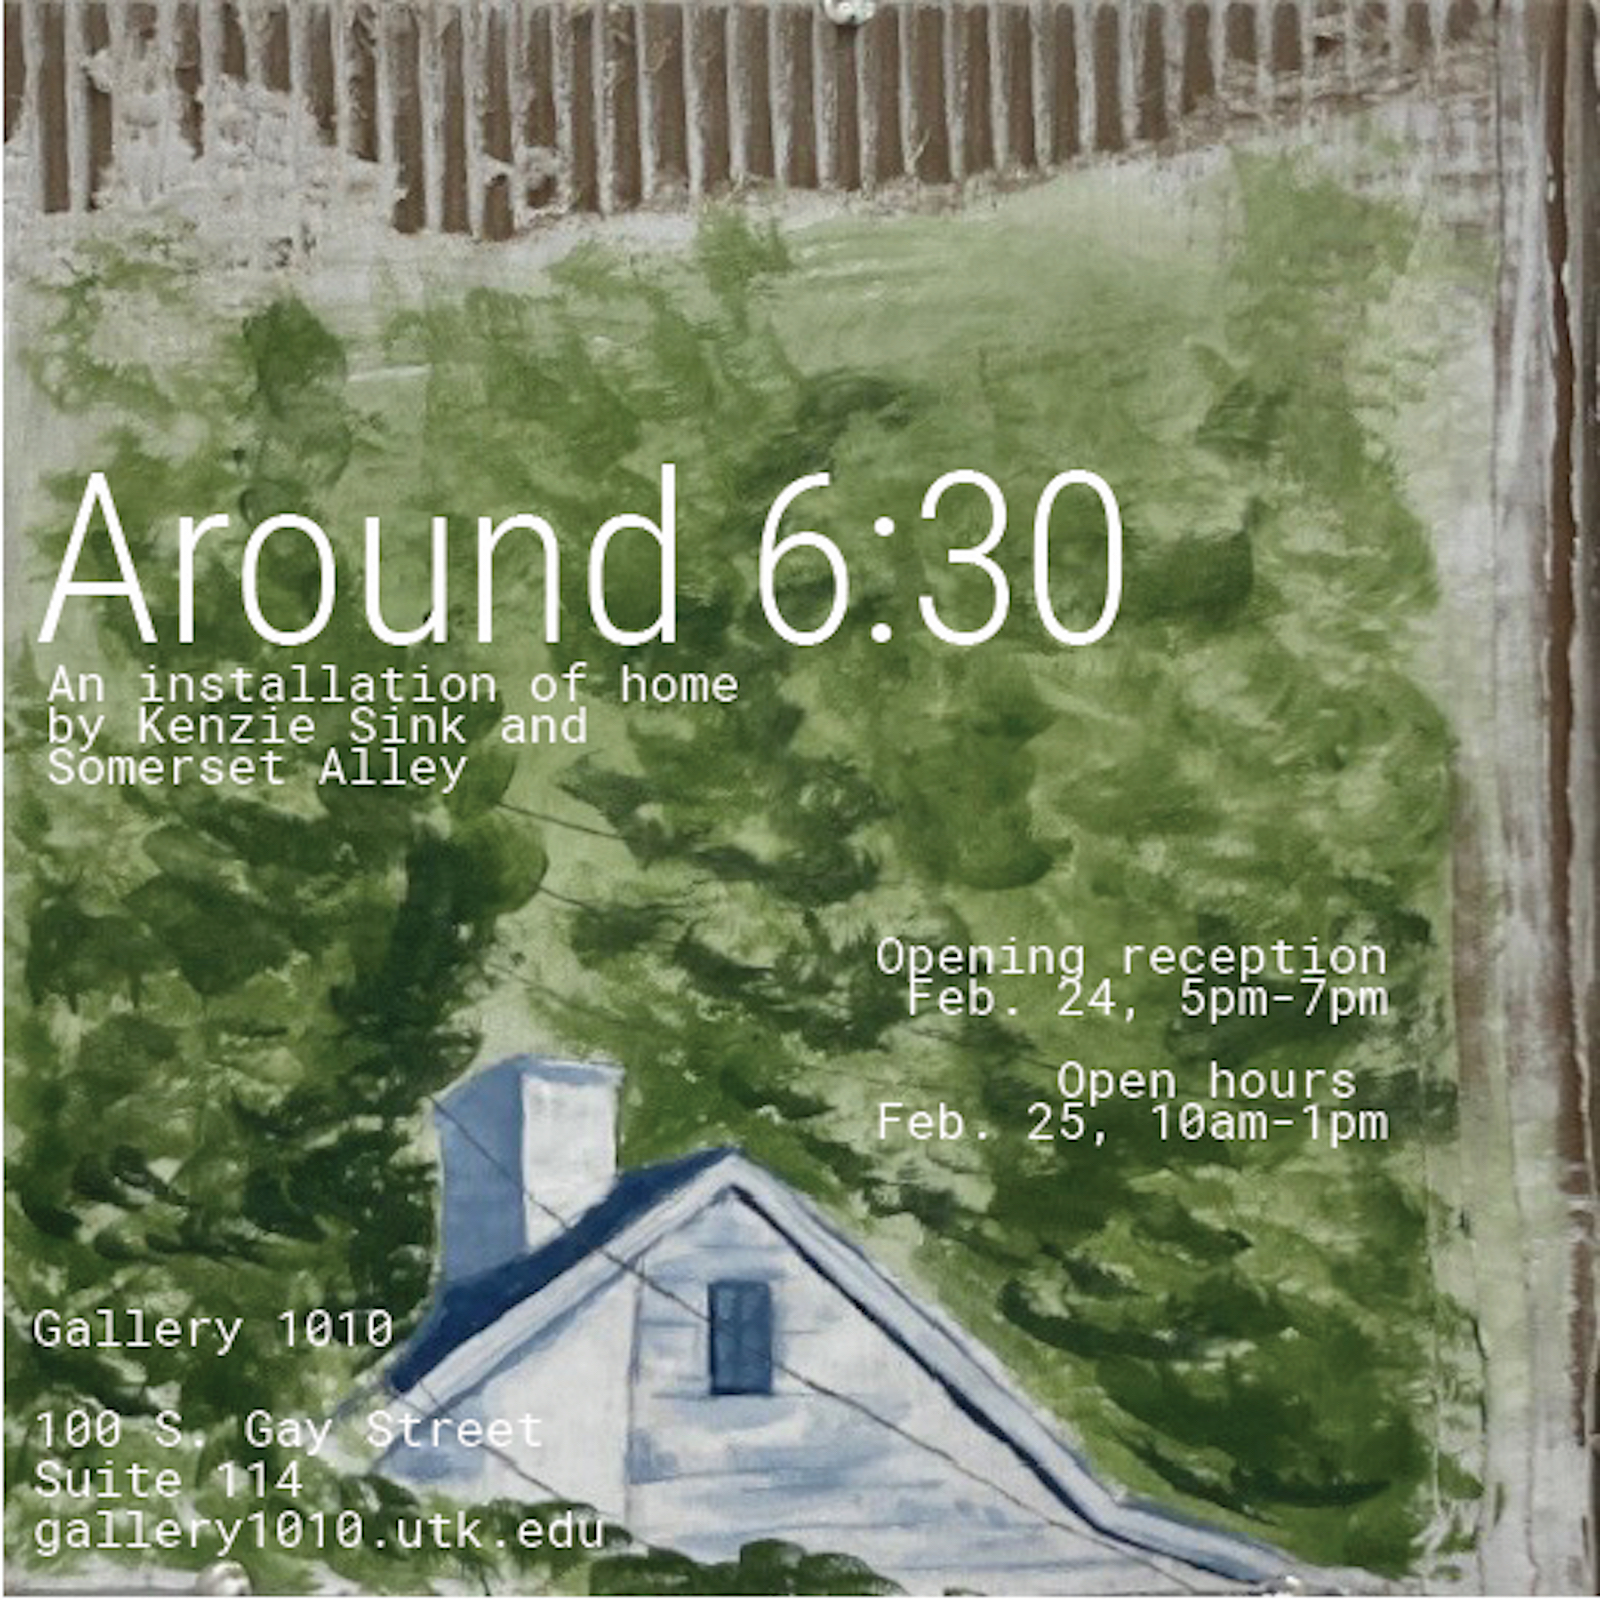 Advertisement for Around 6:30 - an installation of home by Kenzie Sink and Somerset Alley